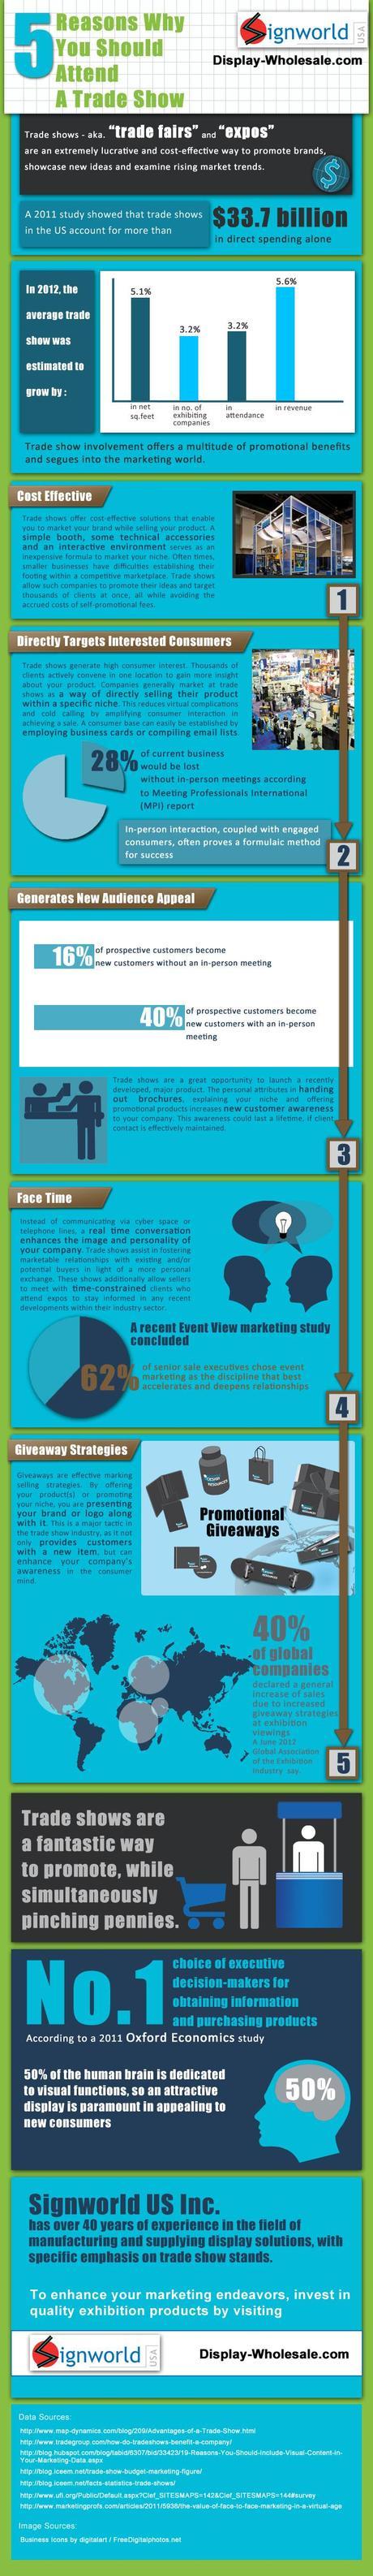 Why You Should Attend A Trade Show Infographic